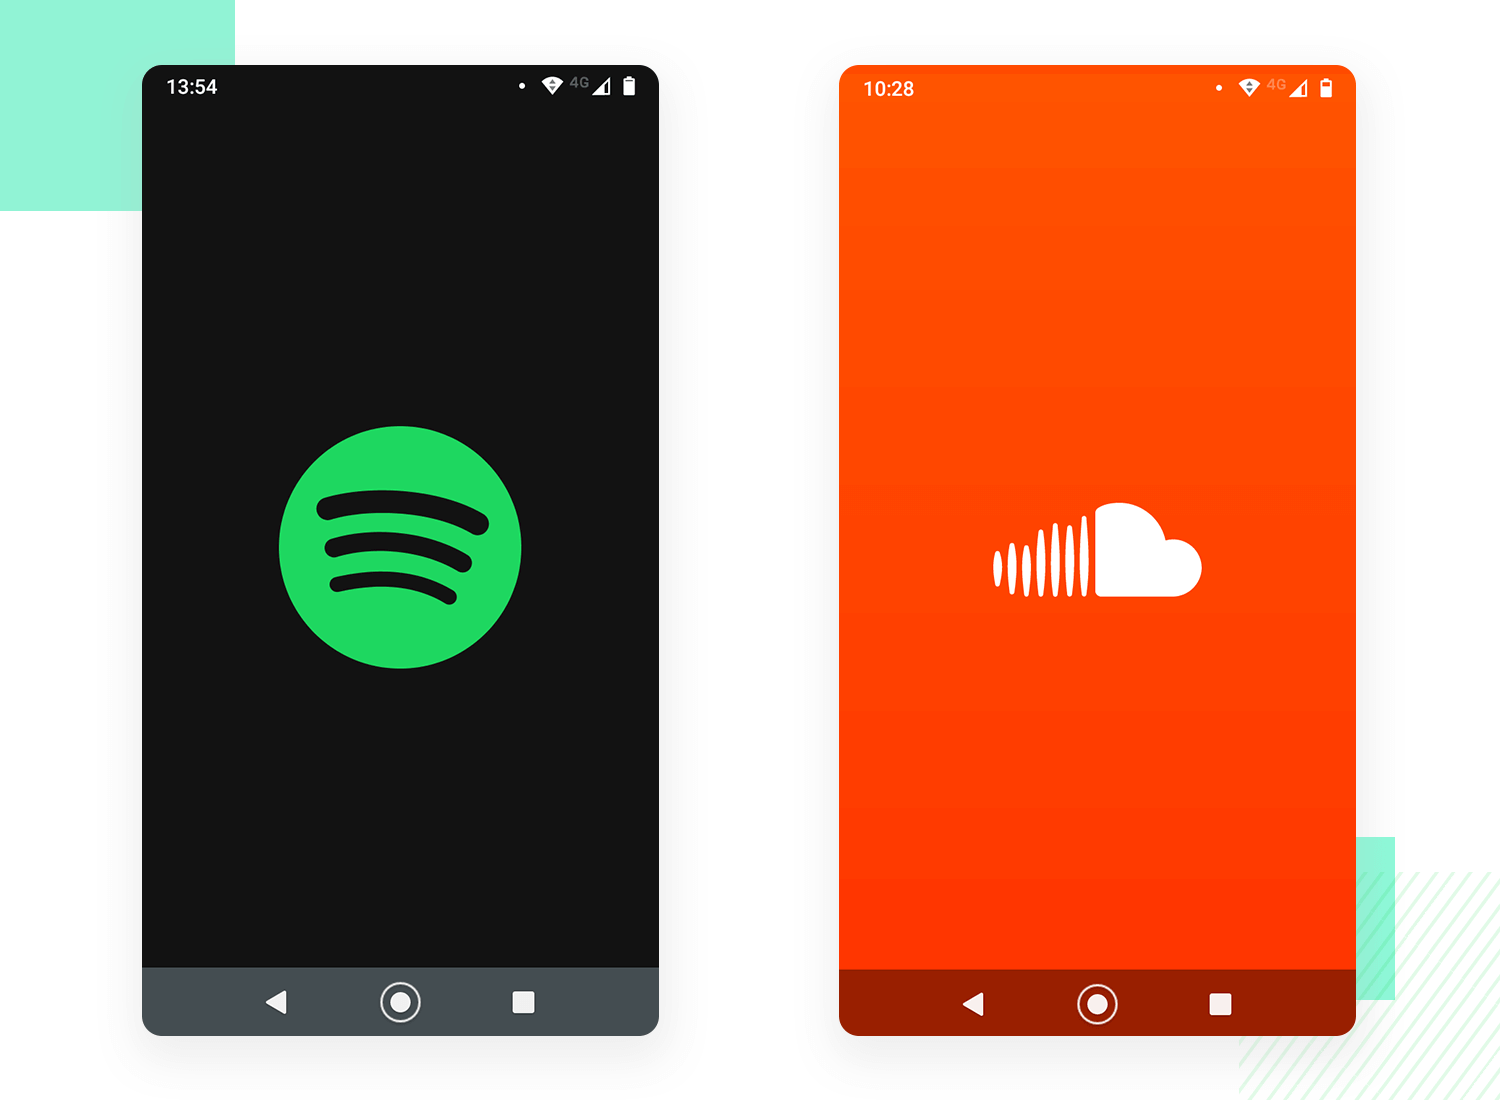 Spotify and Soundcloud spoify-soundcloud-splash-screens-examples-justinmind.png